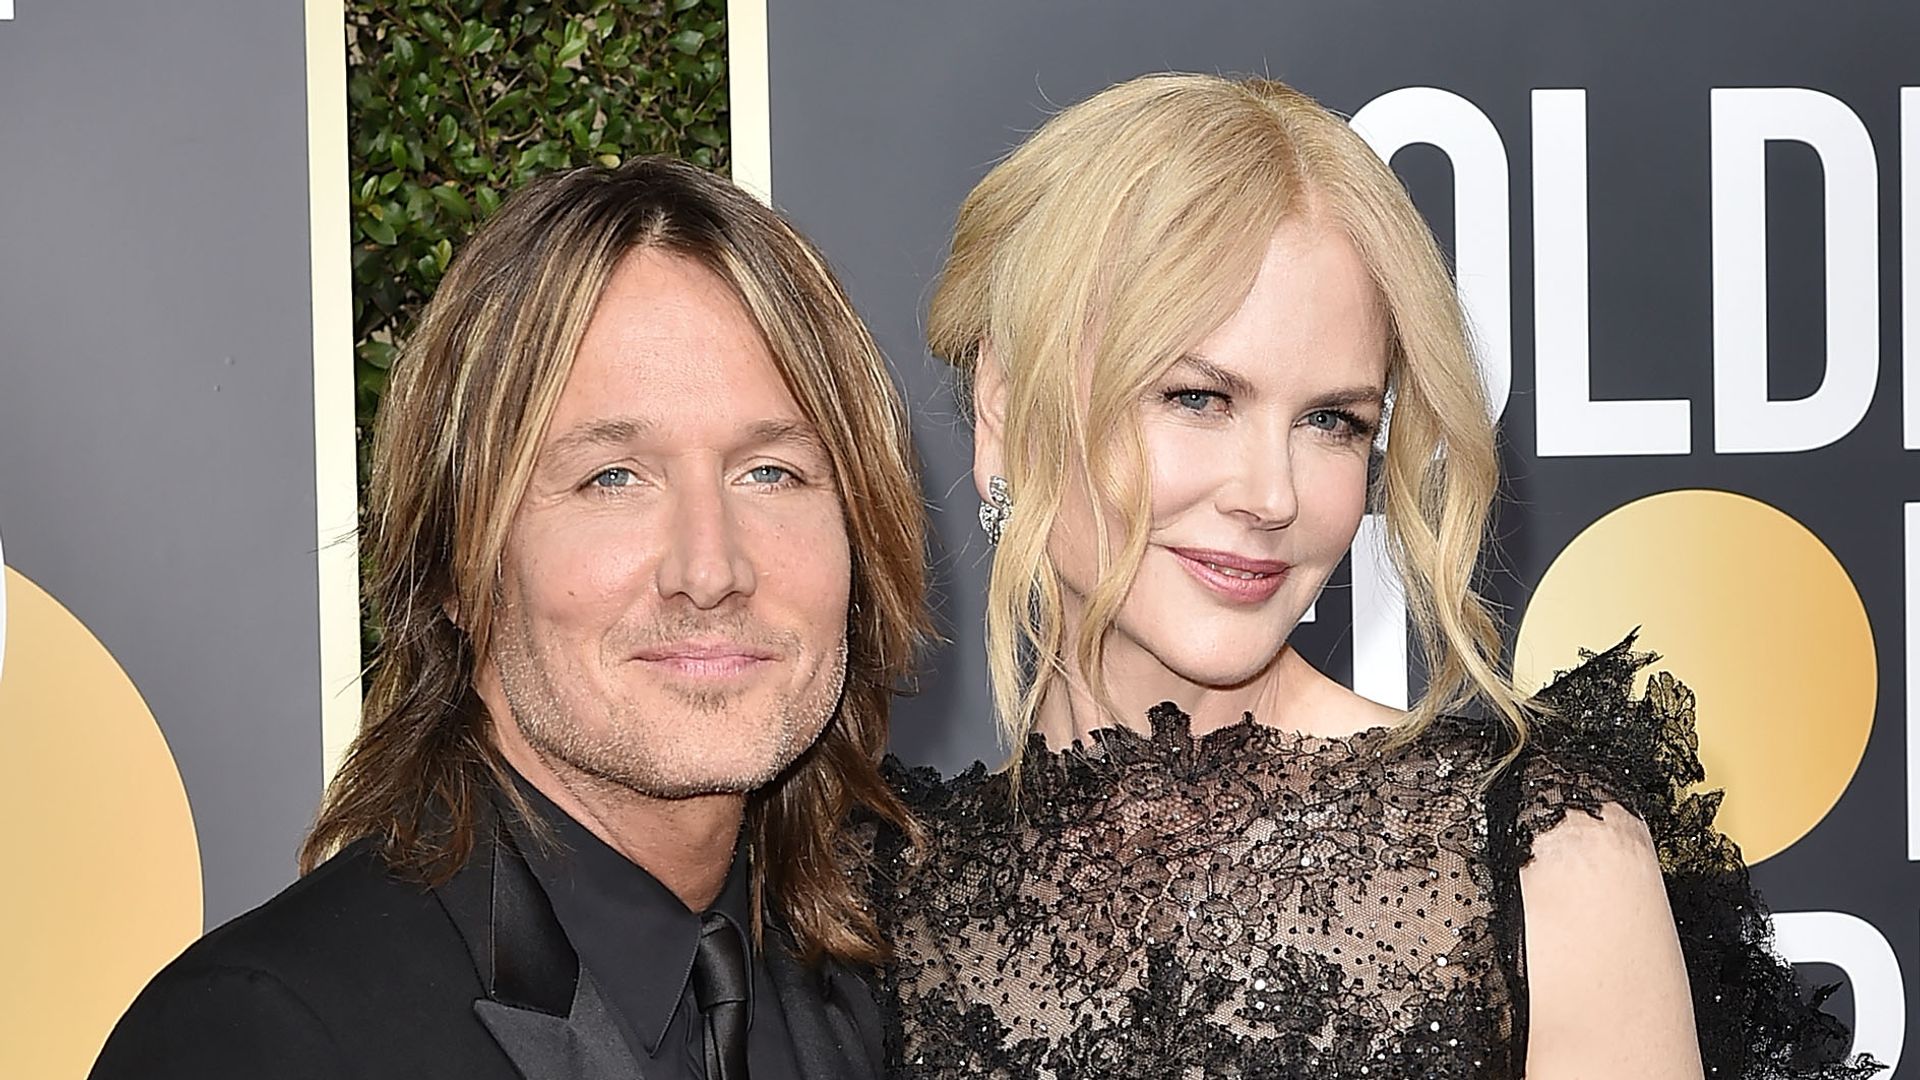 Keith Urban and Nicole Kidman attend the 75th Annual Golden Globe Awards - Arrivals at The Beverly Hilton Hotel on January 7, 2018 in Beverly Hills, California.